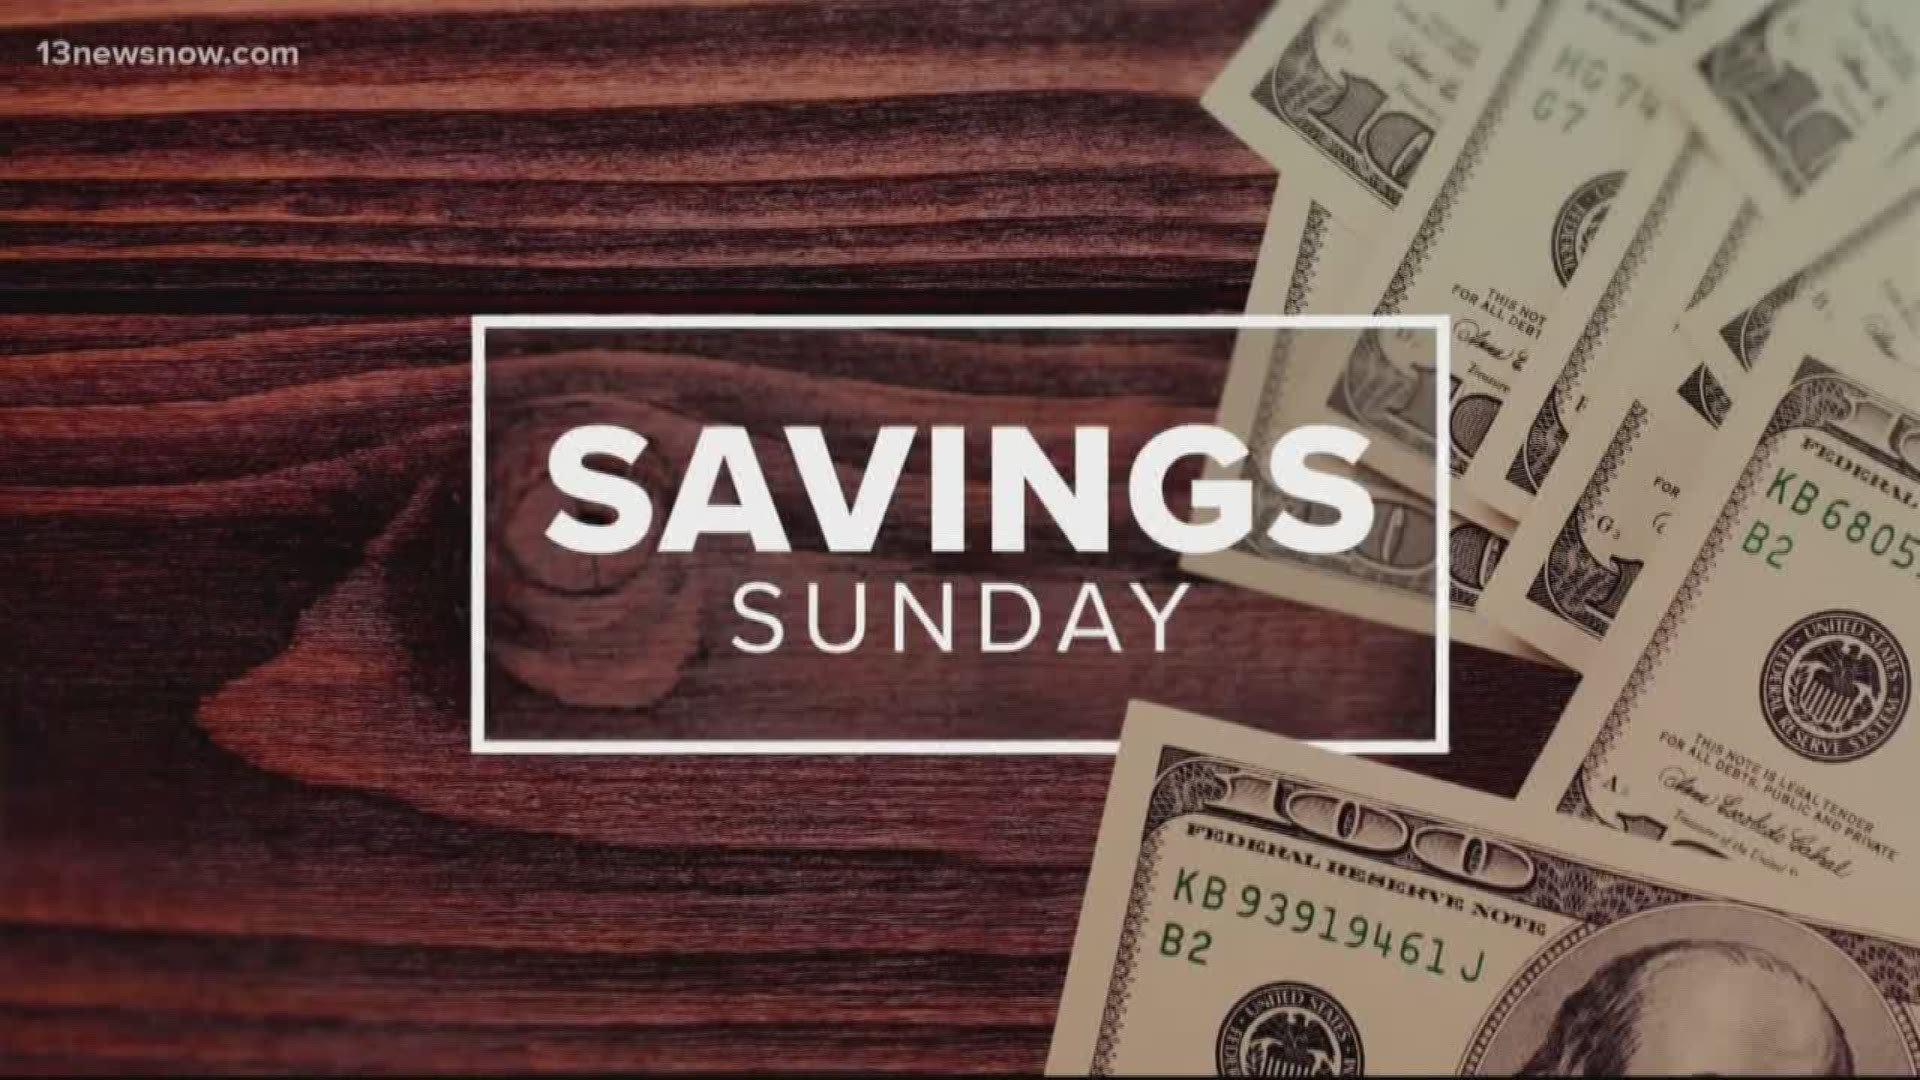 Laura Oliver from www.afrugalchick.com has your big savings for the week of Aug. 25, 2019.